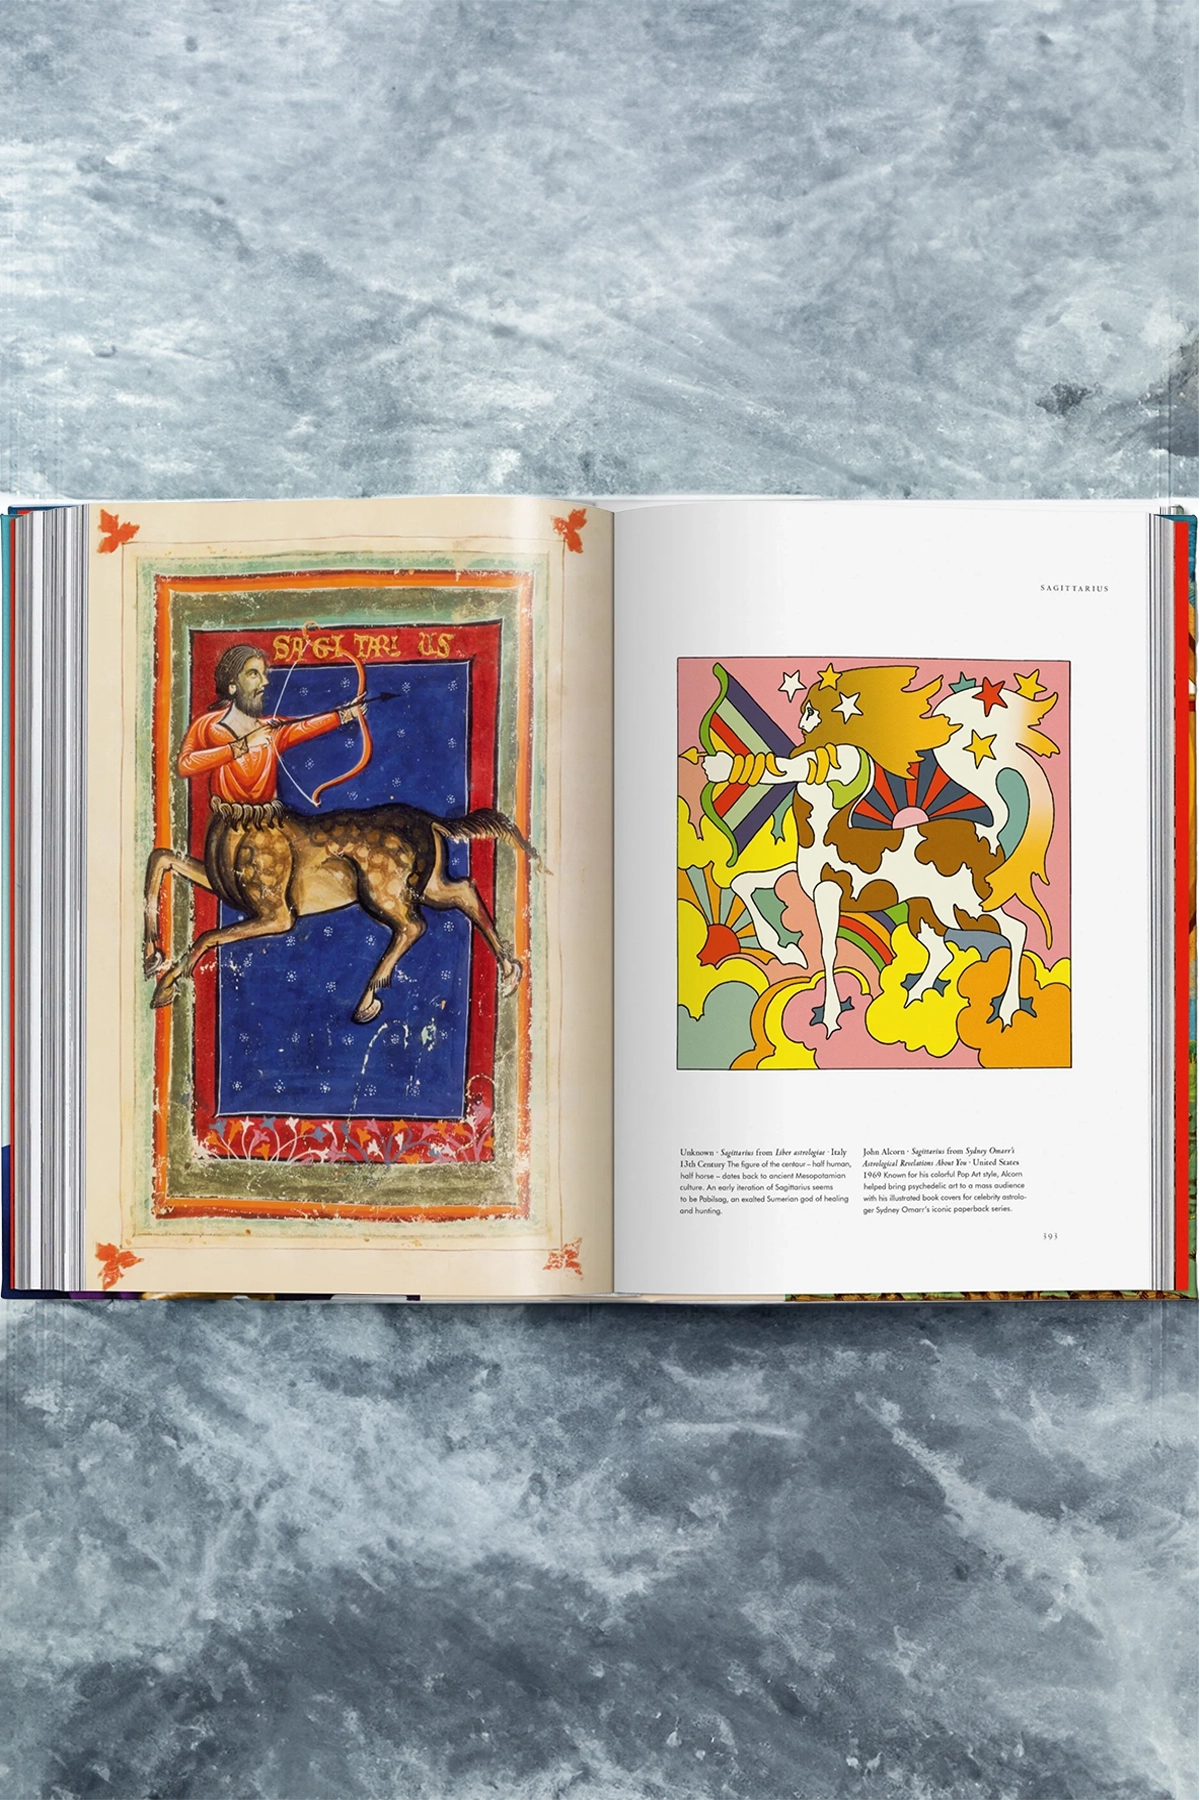 Taschen Astrology. The Library Of Esoterica